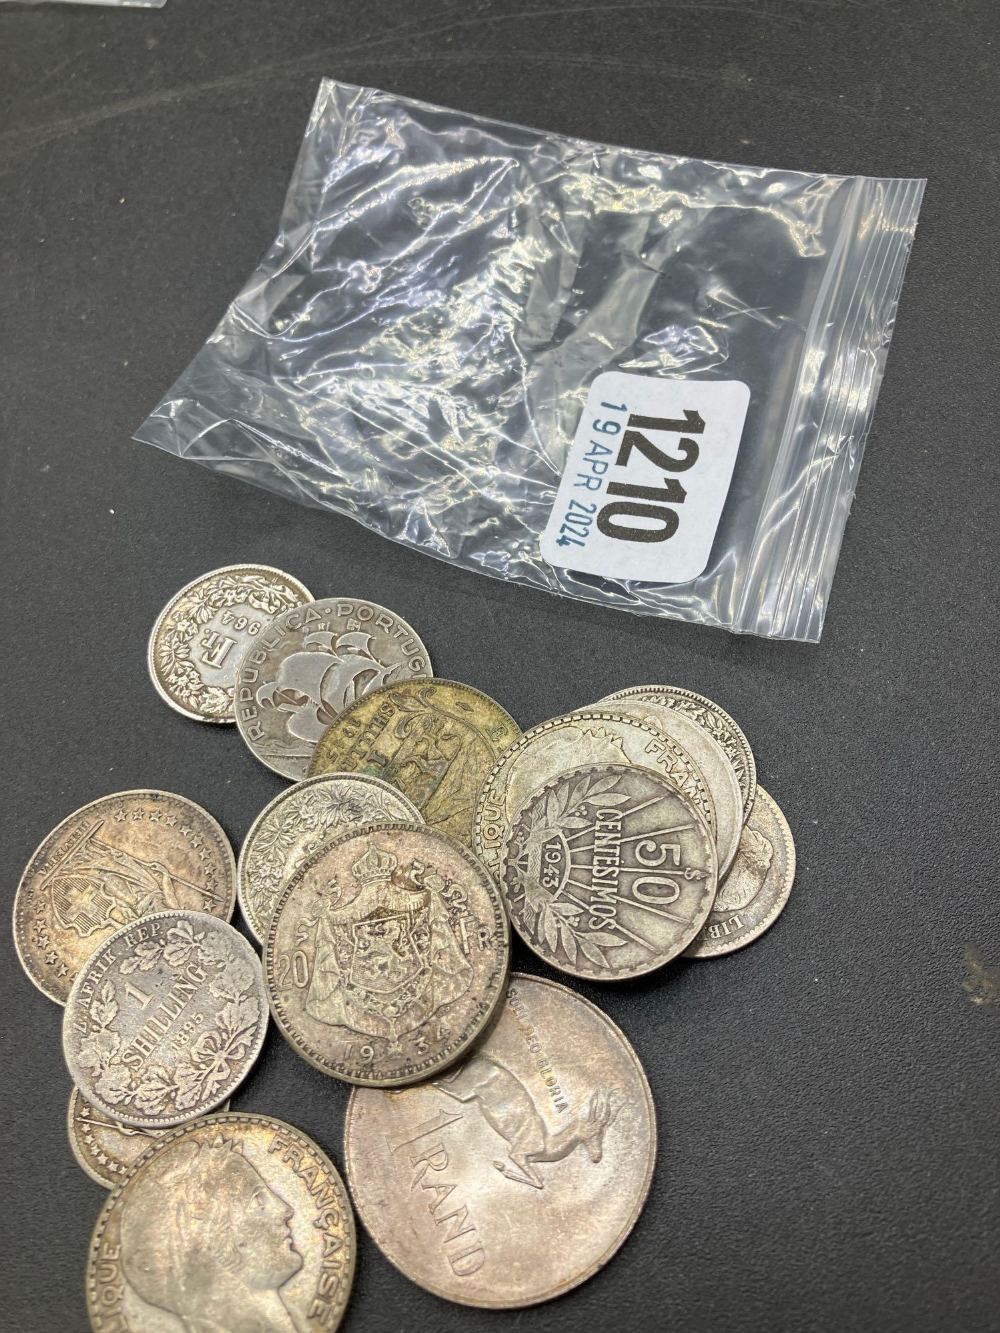 Foreign silver coins 115 gm